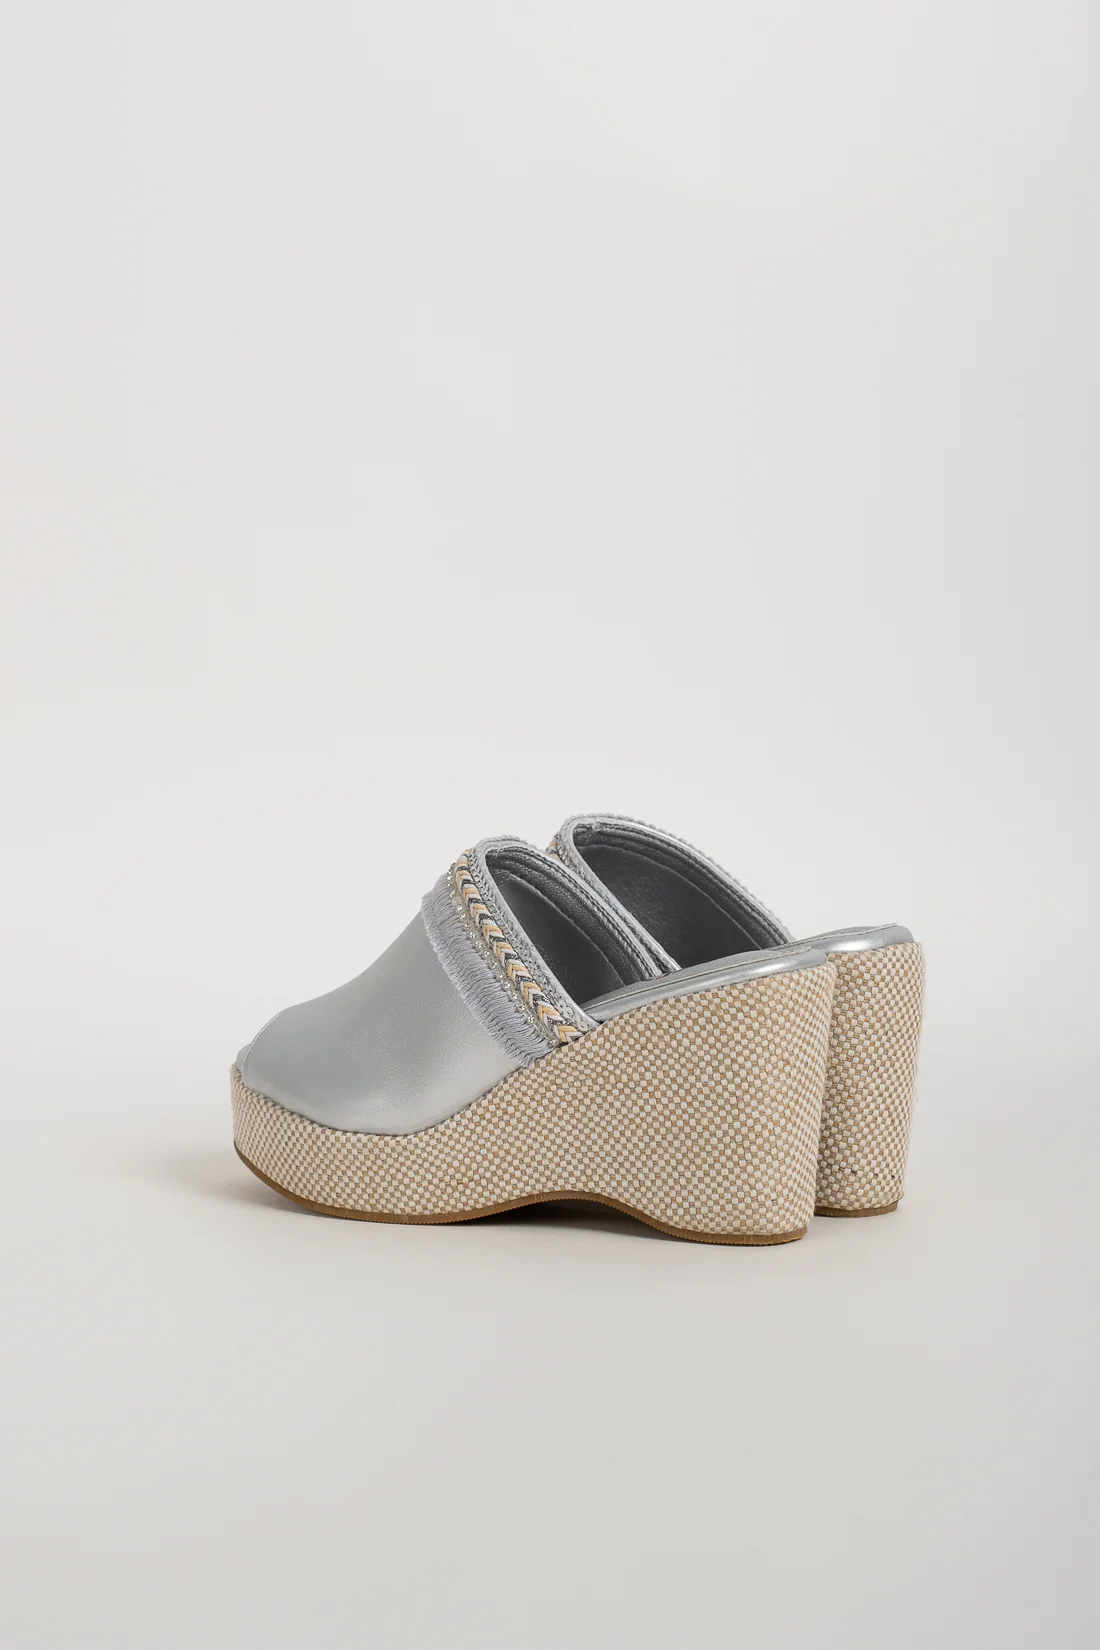 TARY WEDGE - SILVER